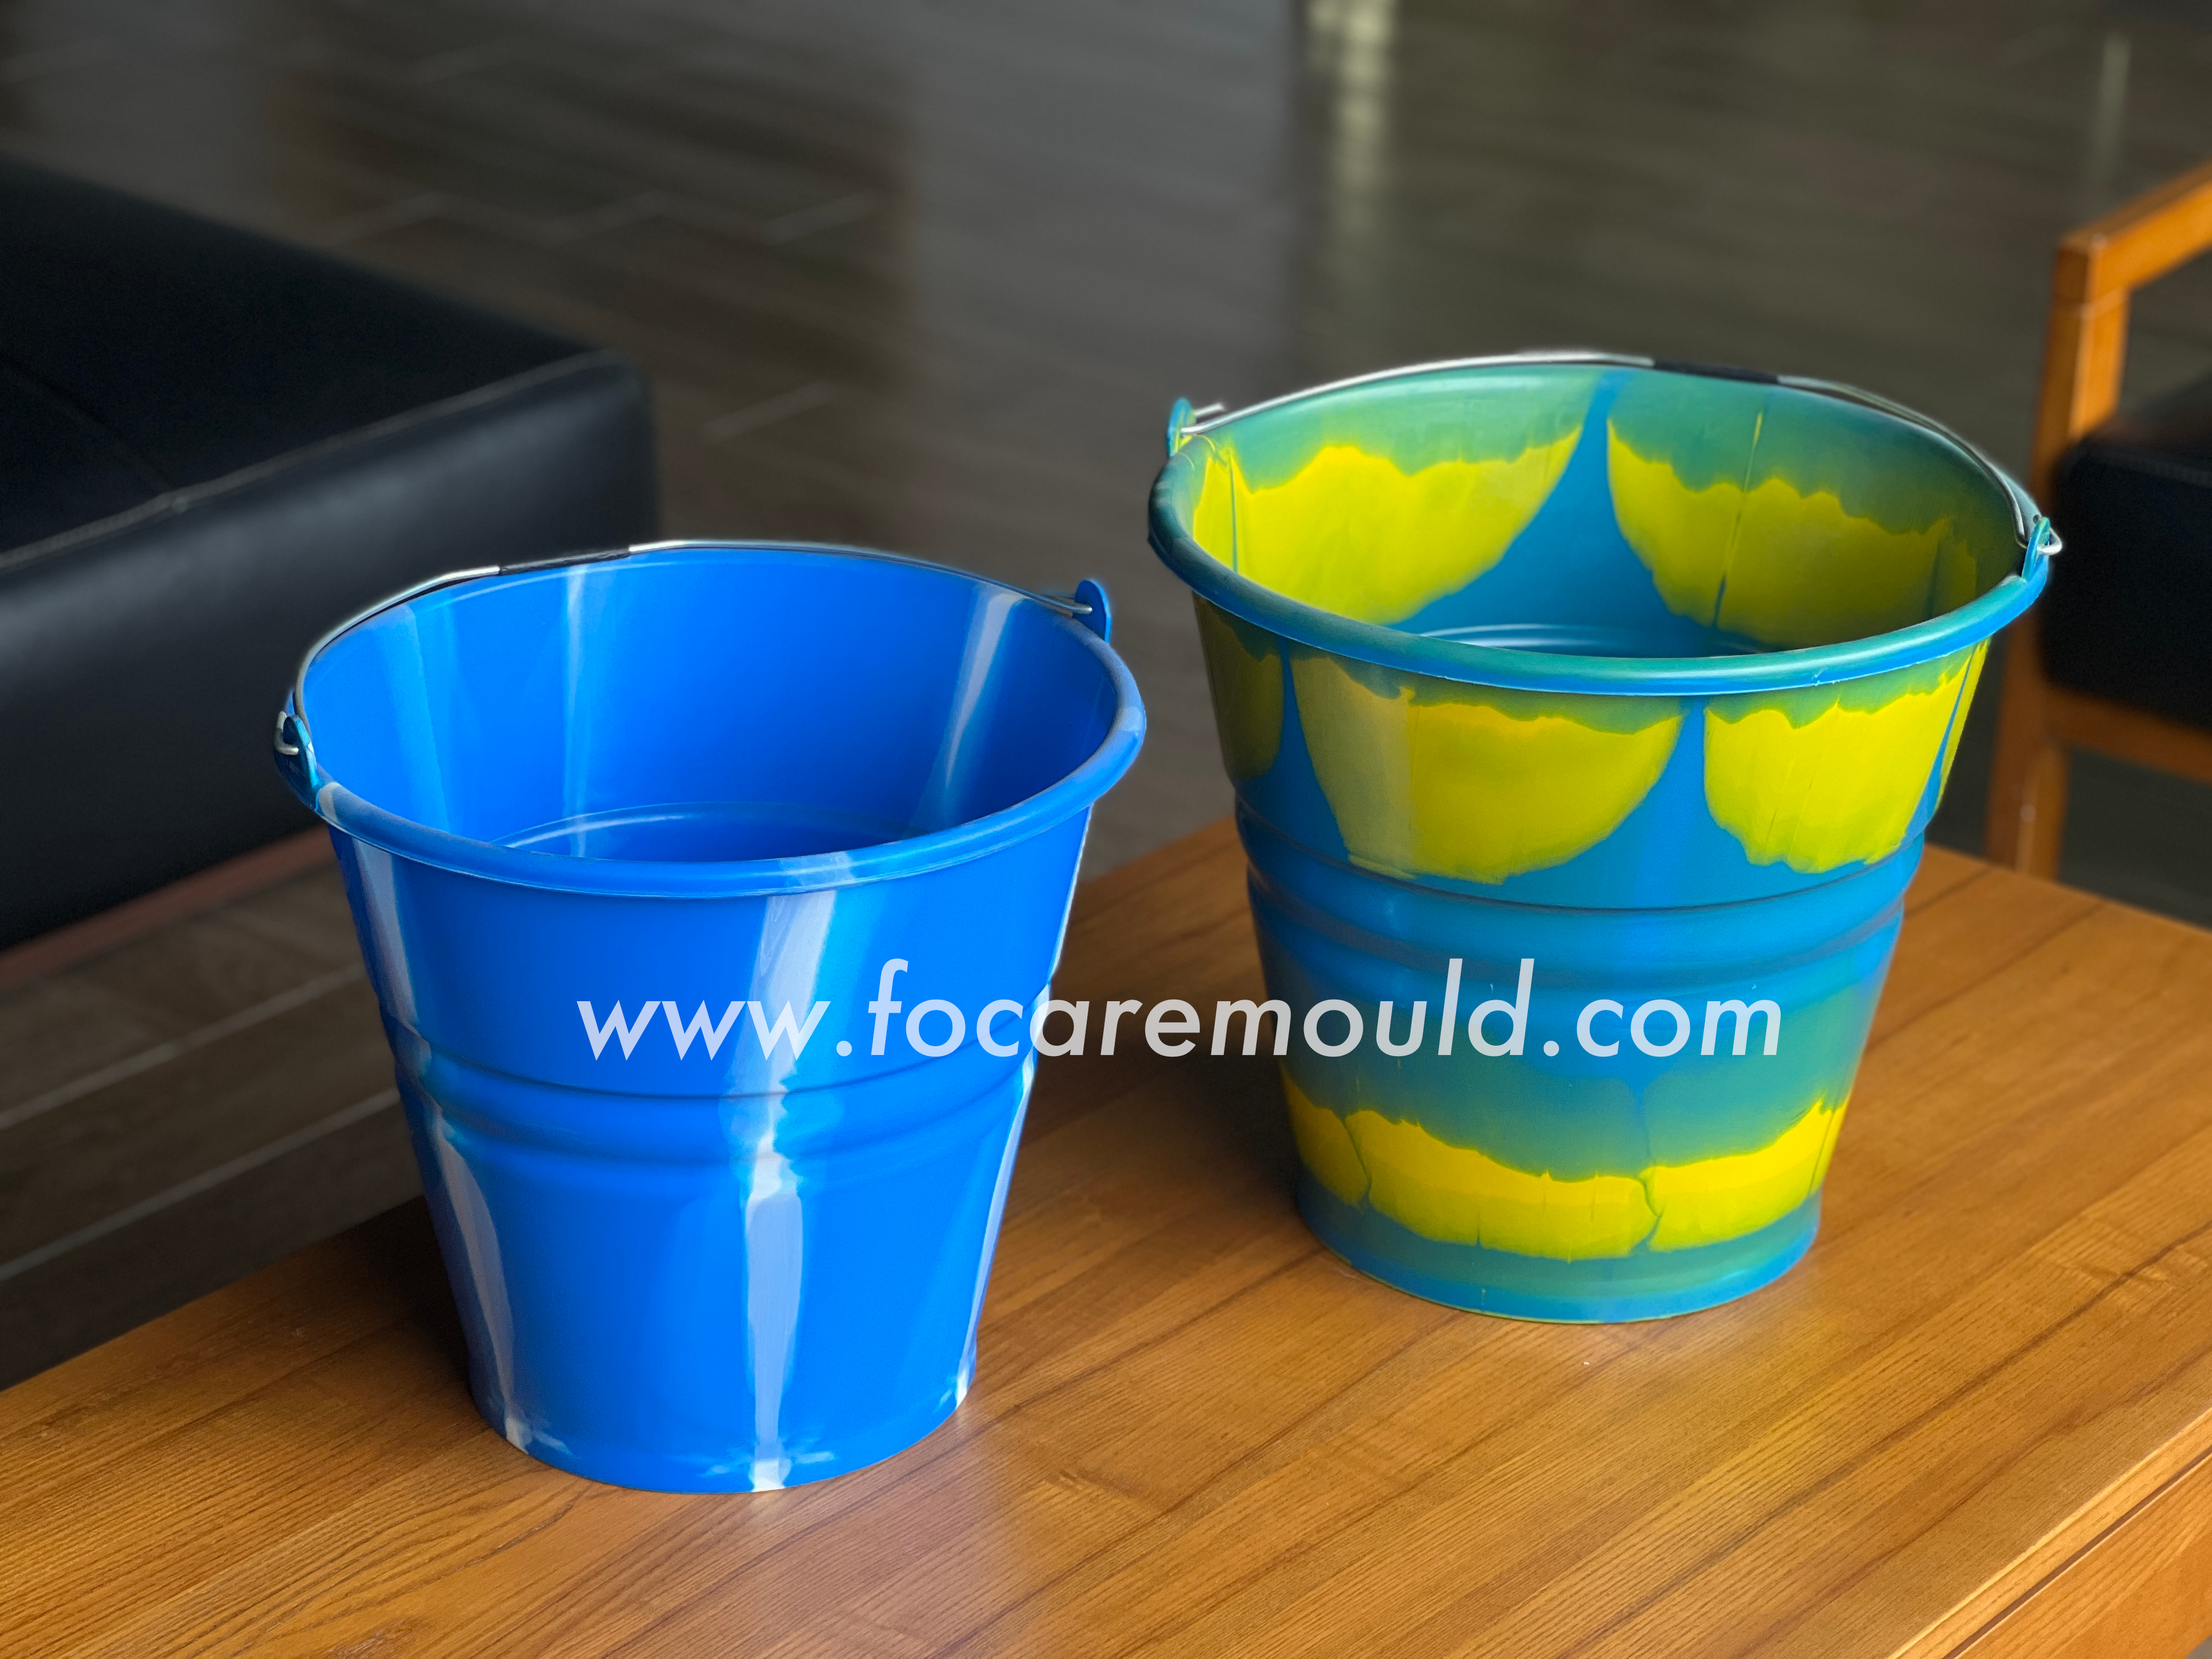 High quality Multi-color Basin Plastic Injection Mould Quotes,China Multi-color Basin Plastic Injection Mould Factory,Multi-color Basin Plastic Injection Mould Purchasing